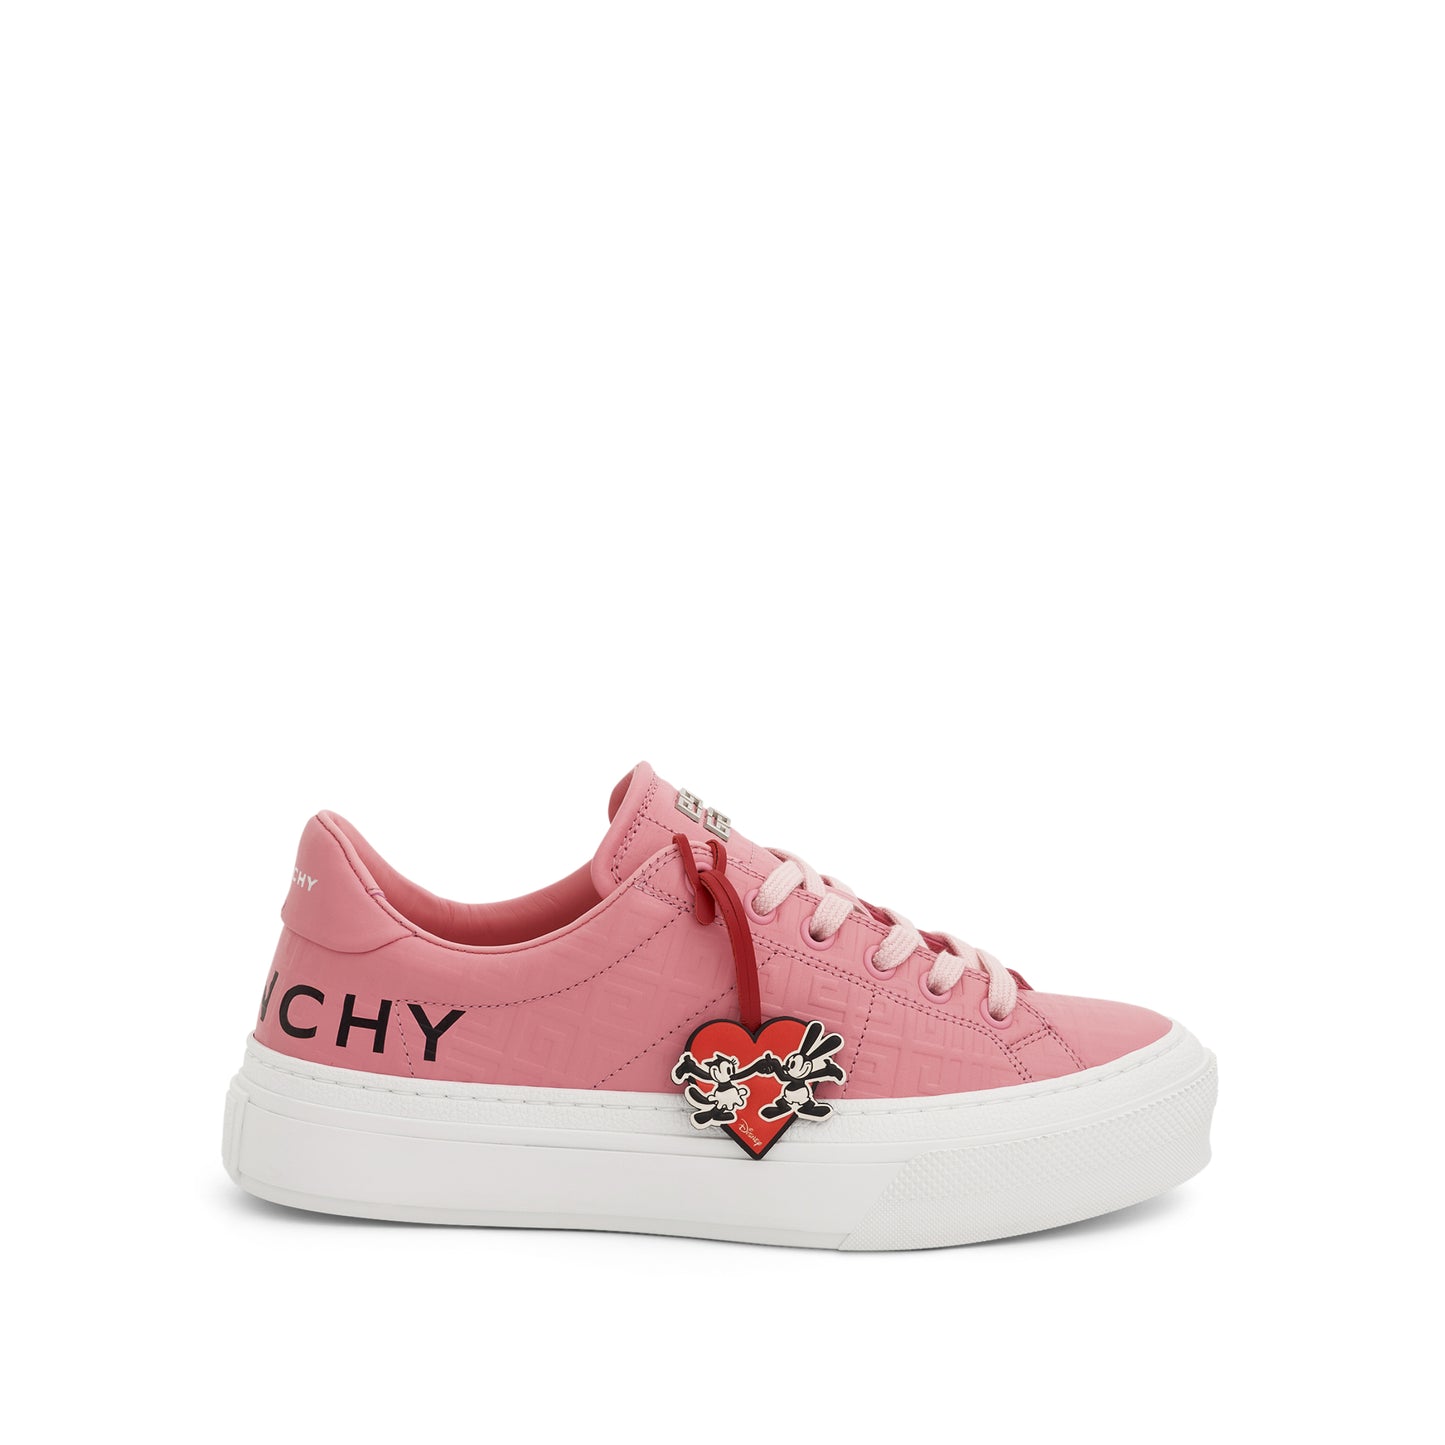 Disney Oswald Tag City Sport Sneaker in Bright Pink